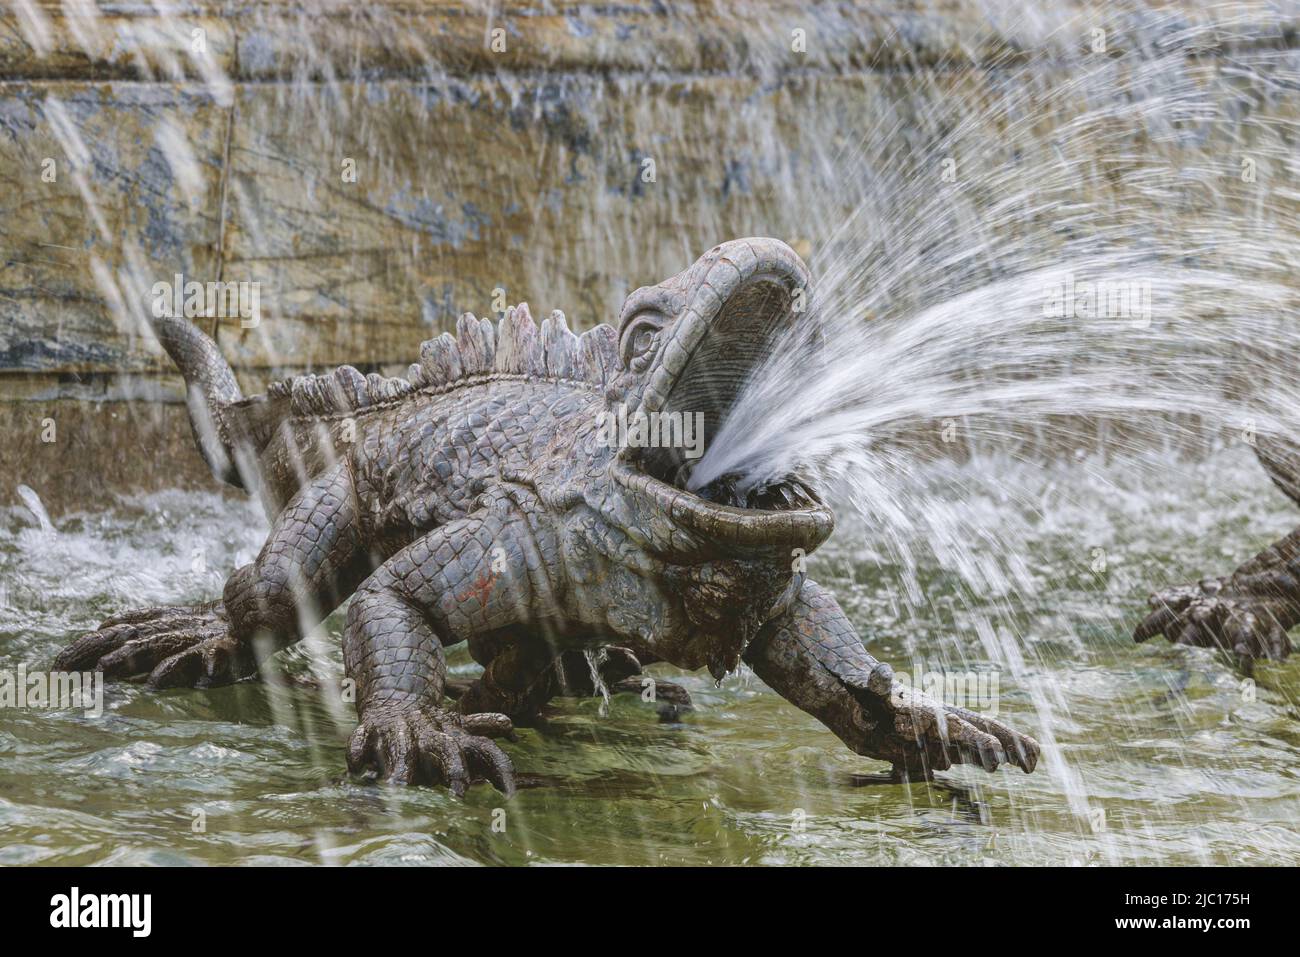 Fountain with water spouting iguana figure at Herrenchiemsee Castle, Germany, Bavaria, Lake Chiemsee Stock Photo